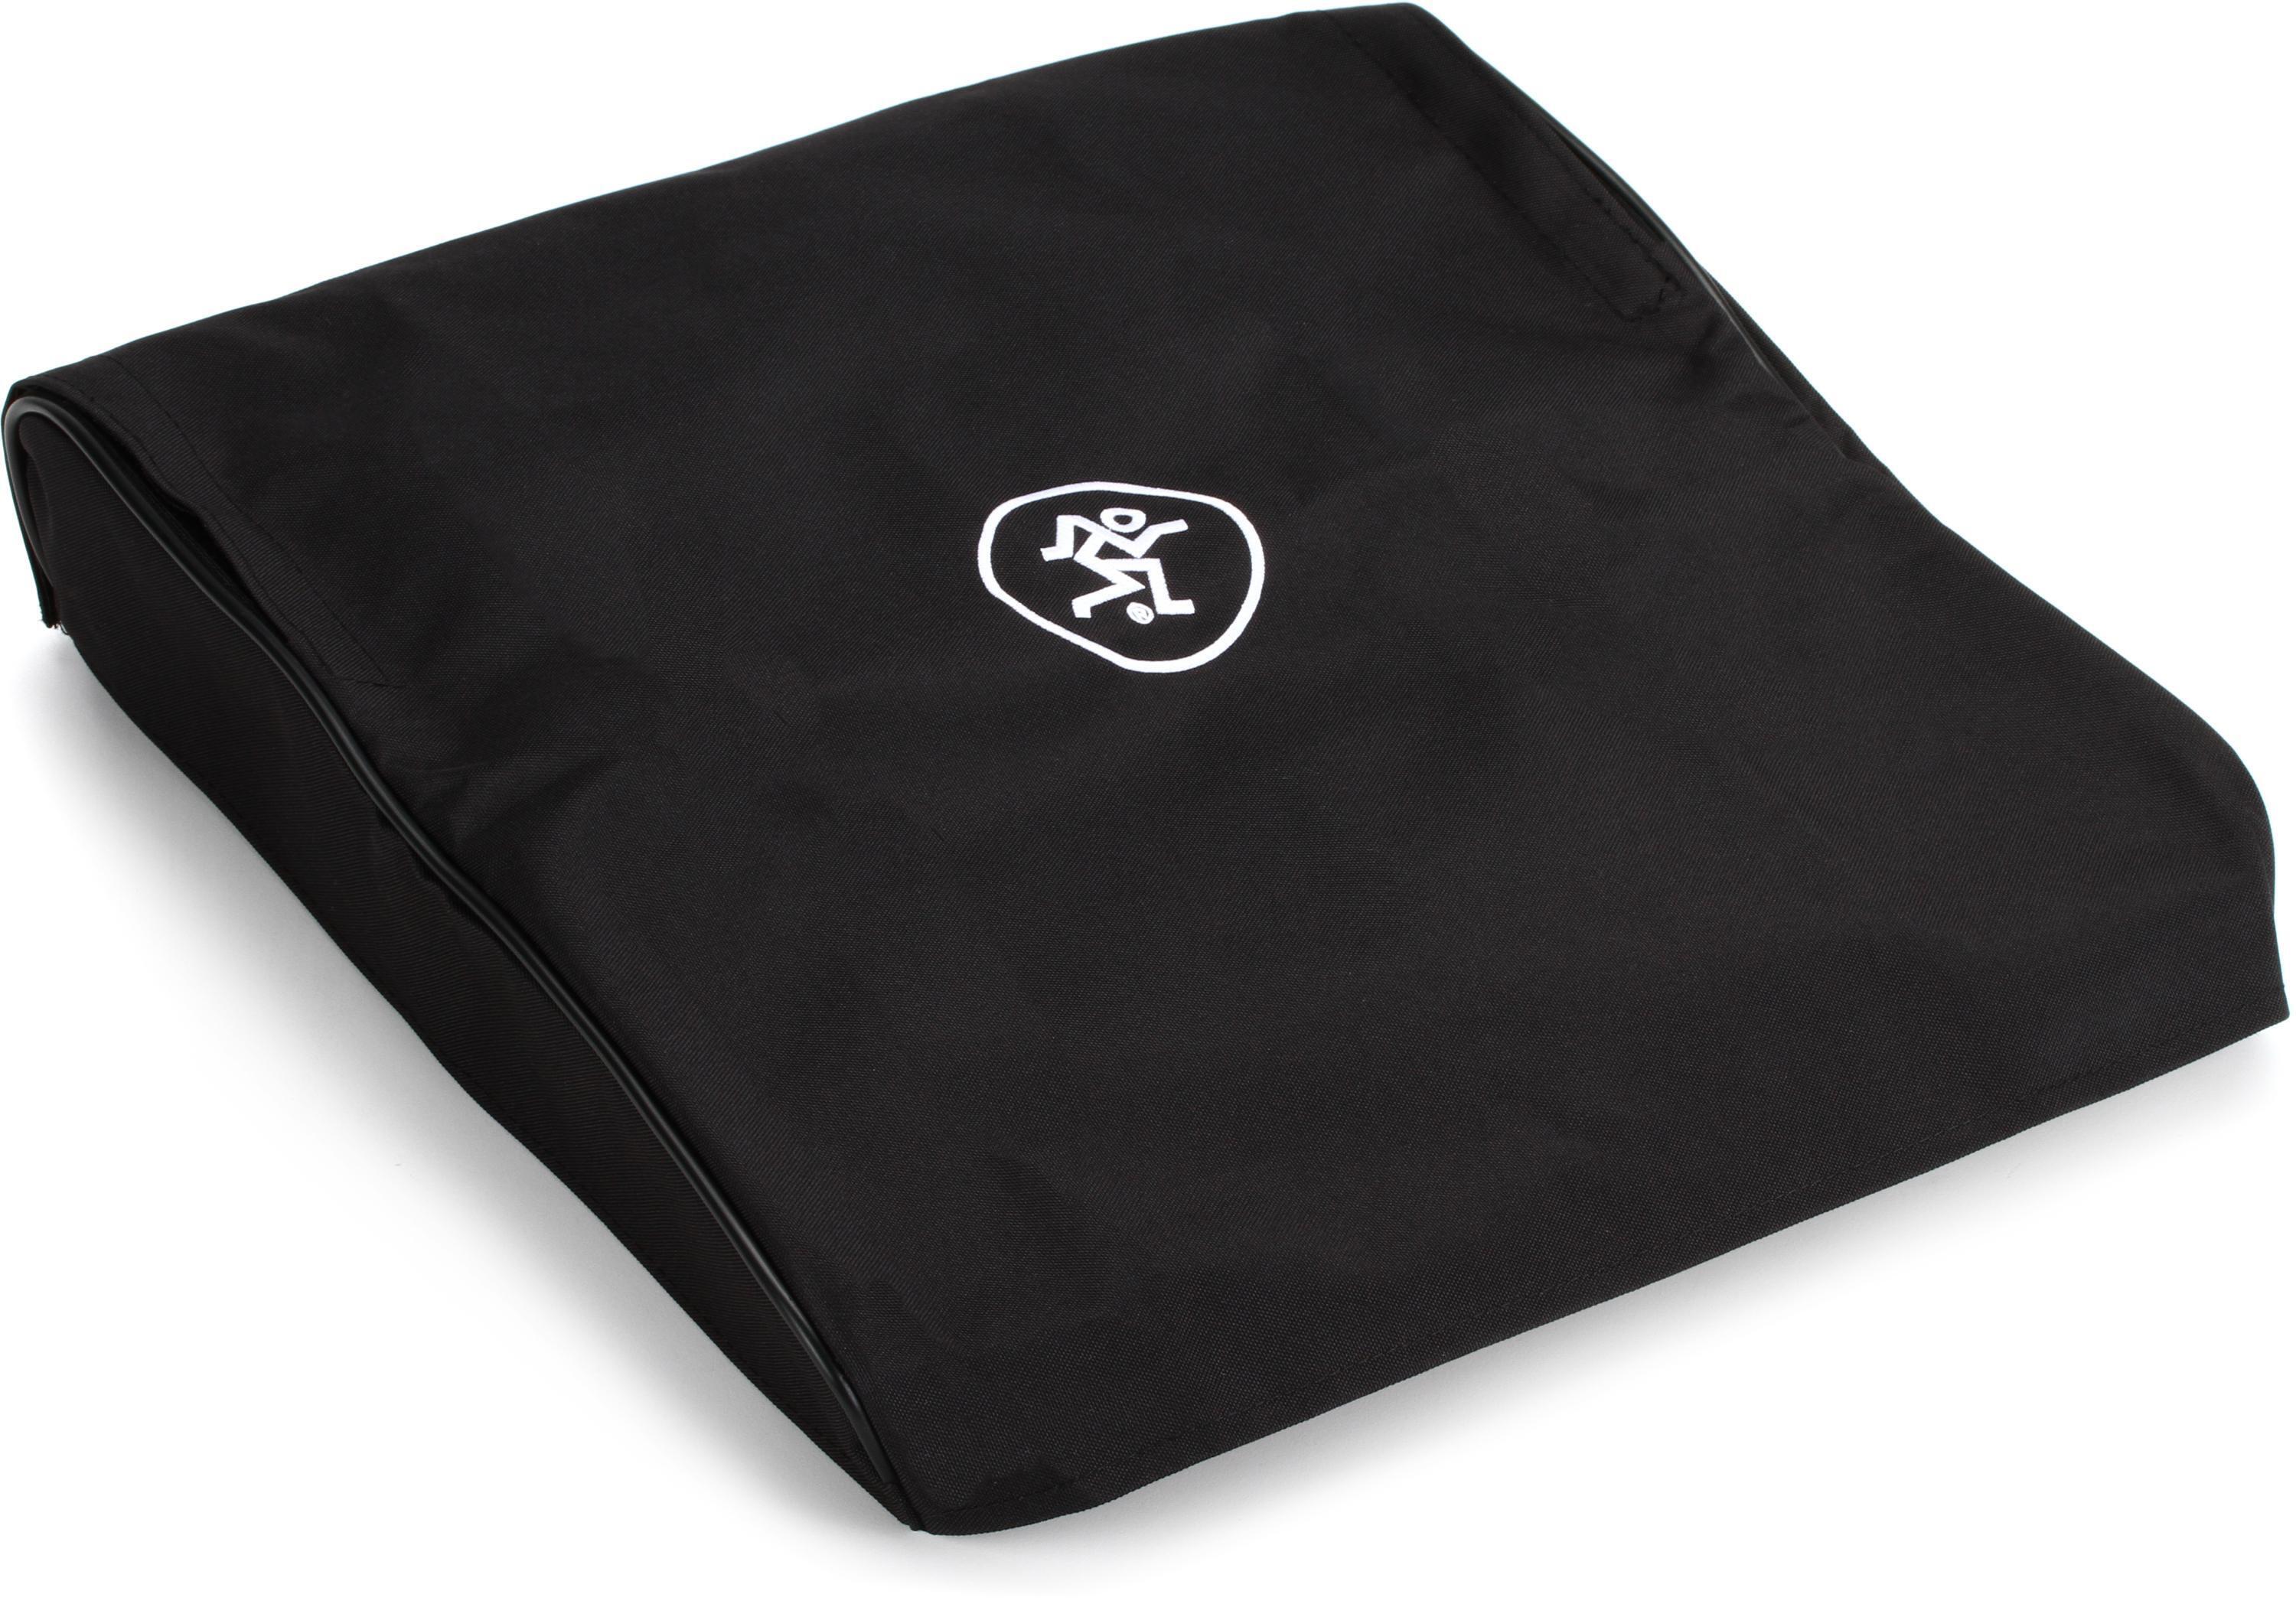 Mackie ProFX16v3 Dust Cover | Sweetwater